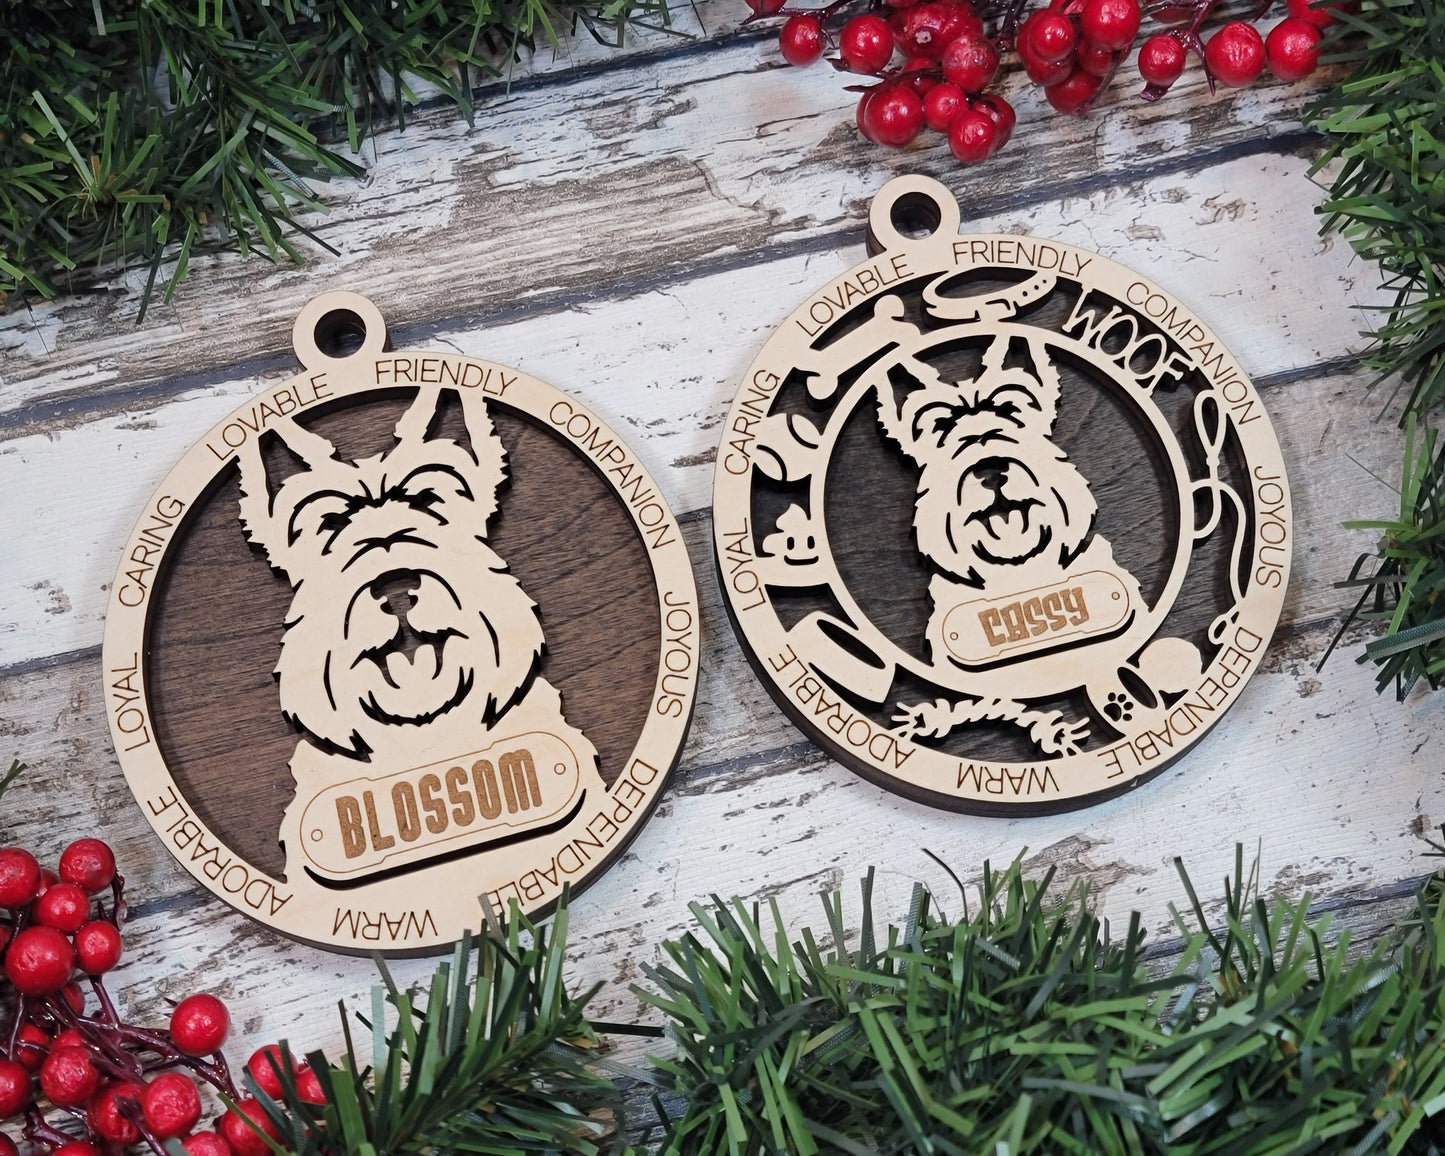 Scottish Terrier - Adorable Dog Ornaments - 2 Ornaments included - SVG, PDF, AI File Download - Sized for Glowforge